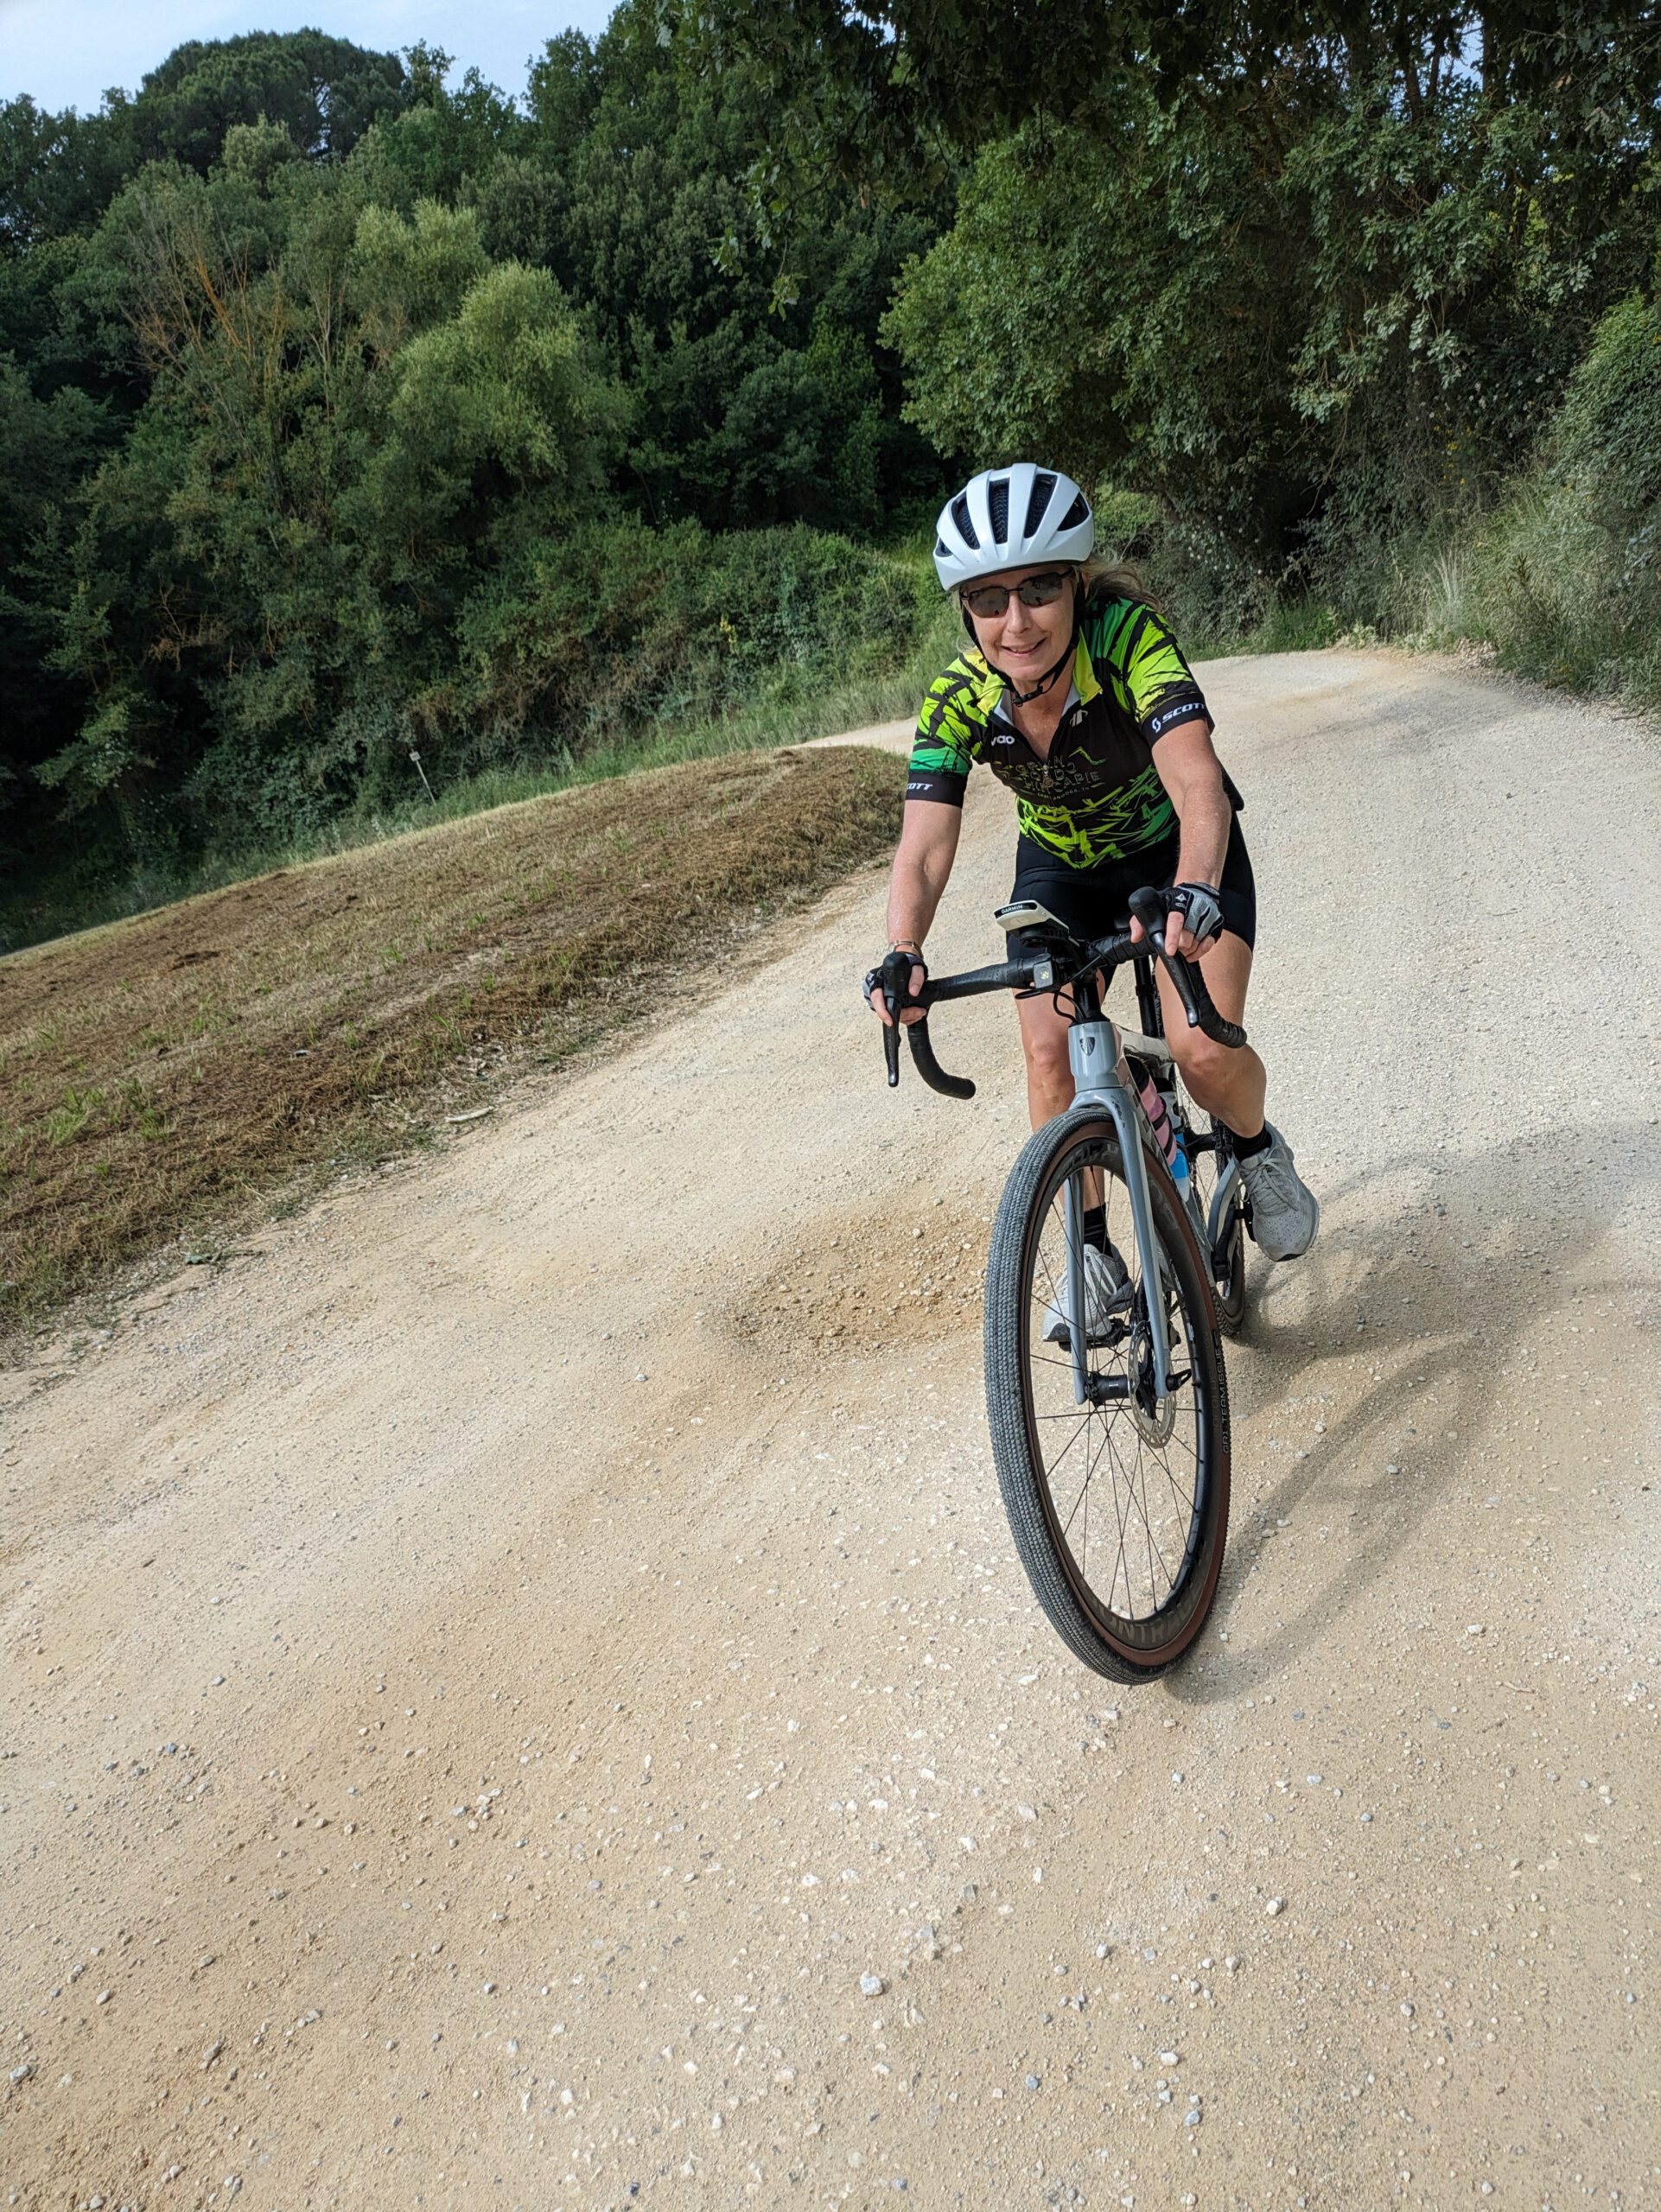 A woman cycling on a gravel road